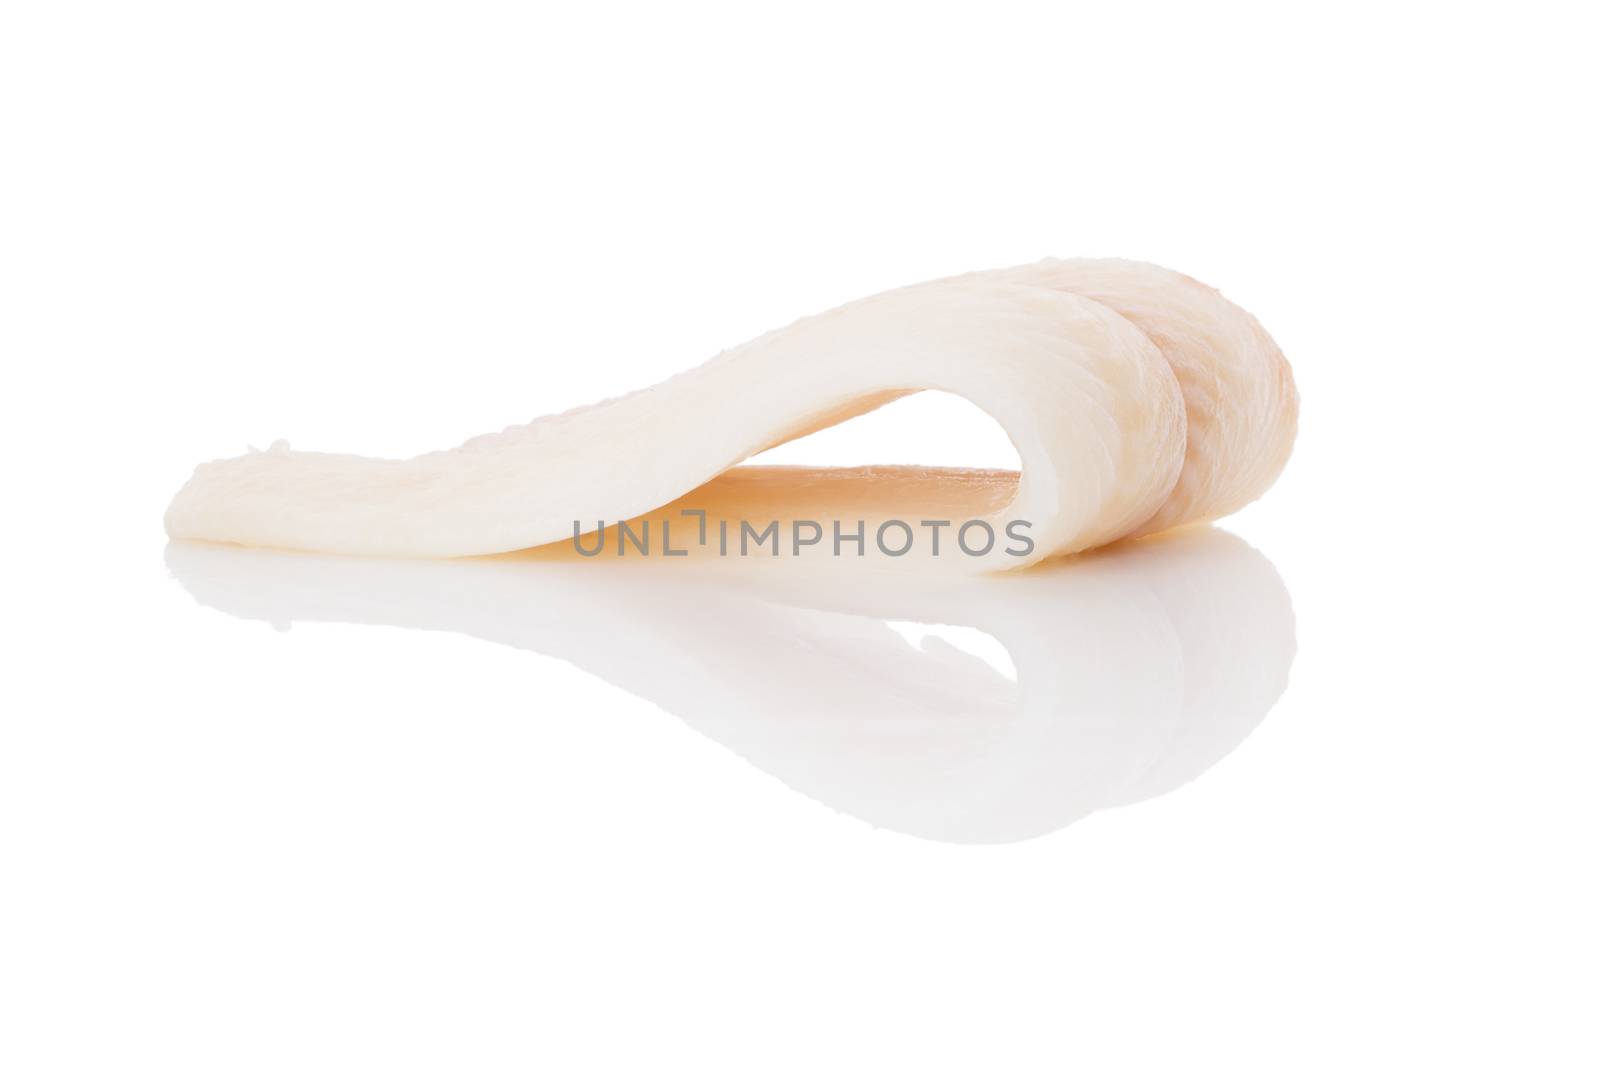 Raw fresh halibut steak isolated on white background. Culinary healthy seafood eating. 